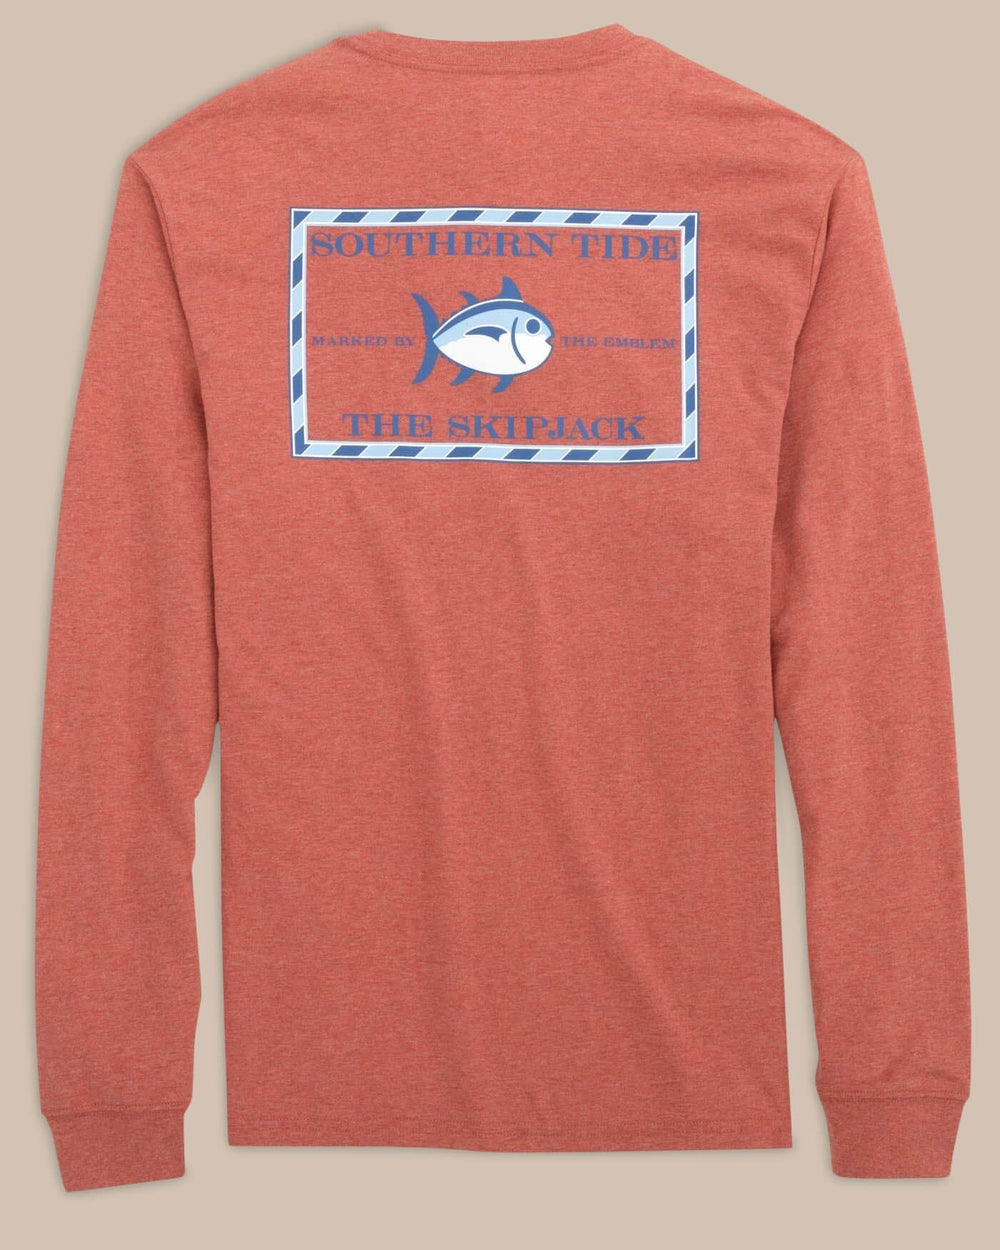 The back view of the Southern Tide Heather Original Skipjack Long Sleeve T-shirt by Southern Tide - Heather Dusty Coral